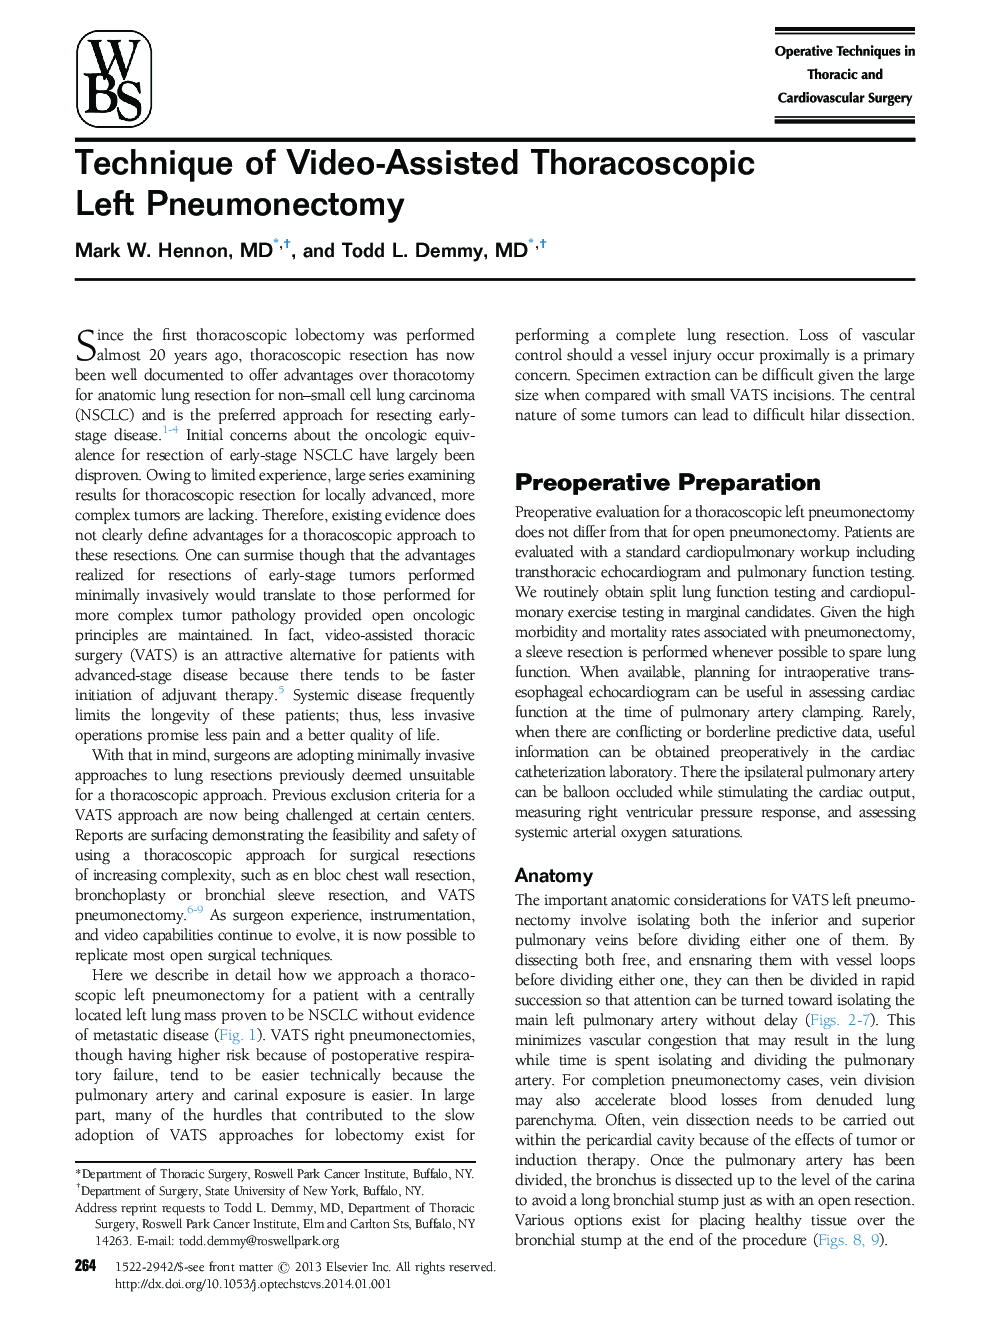 Technique of Video-Assisted Thoracoscopic Left Pneumonectomy